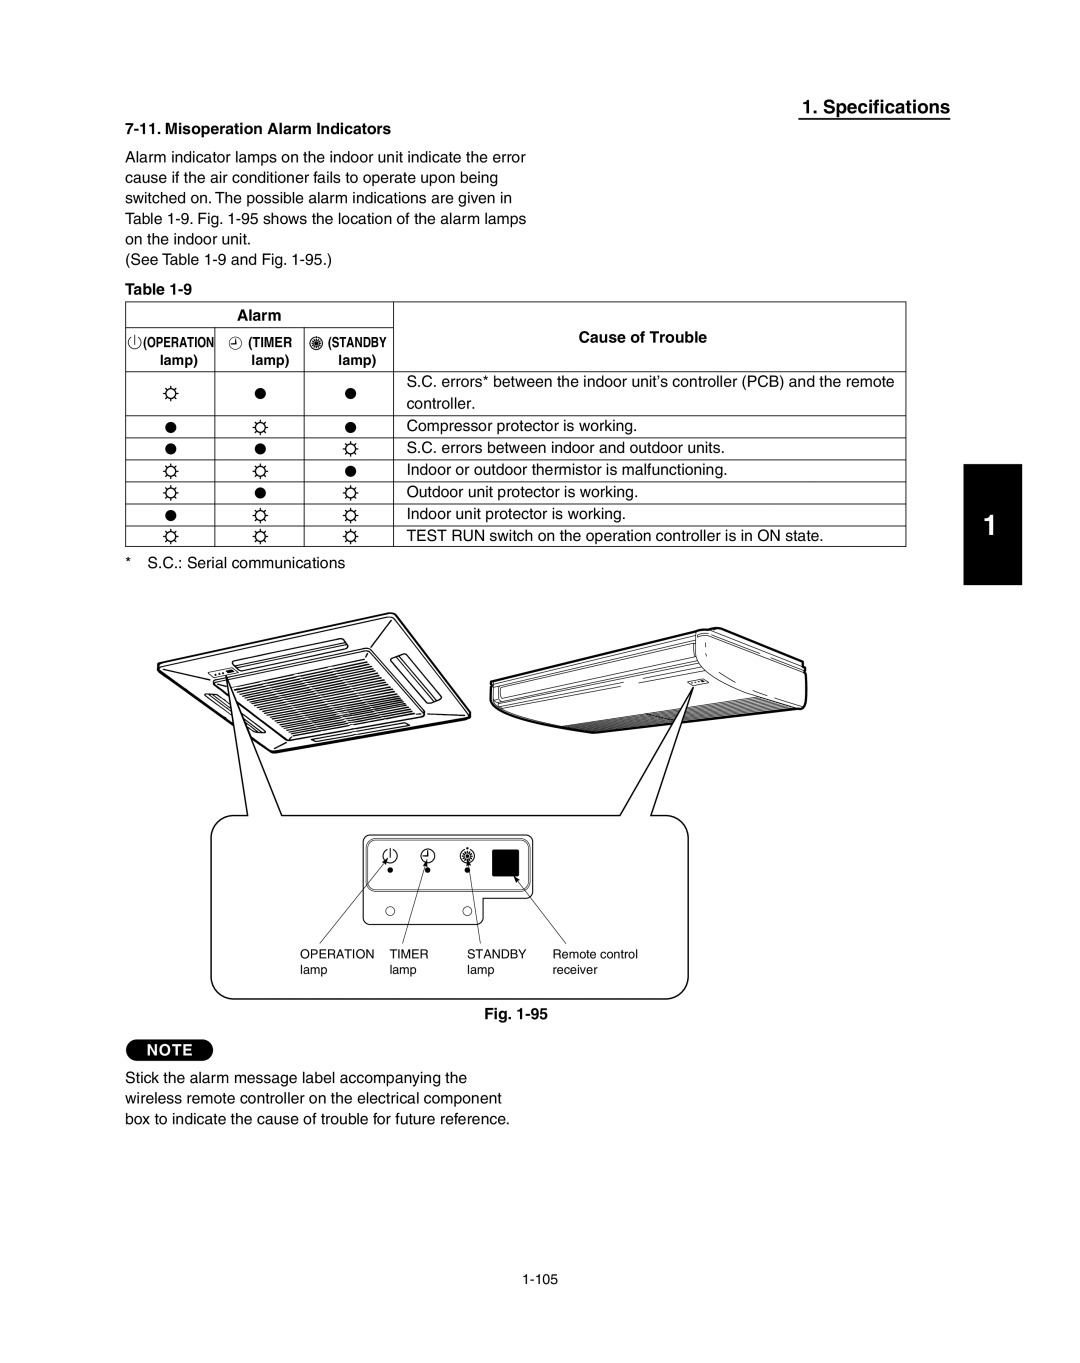 Panasonic R410A service manual Specifications, Misoperation Alarm Indicators, Table, Cause of Trouble, Fig 